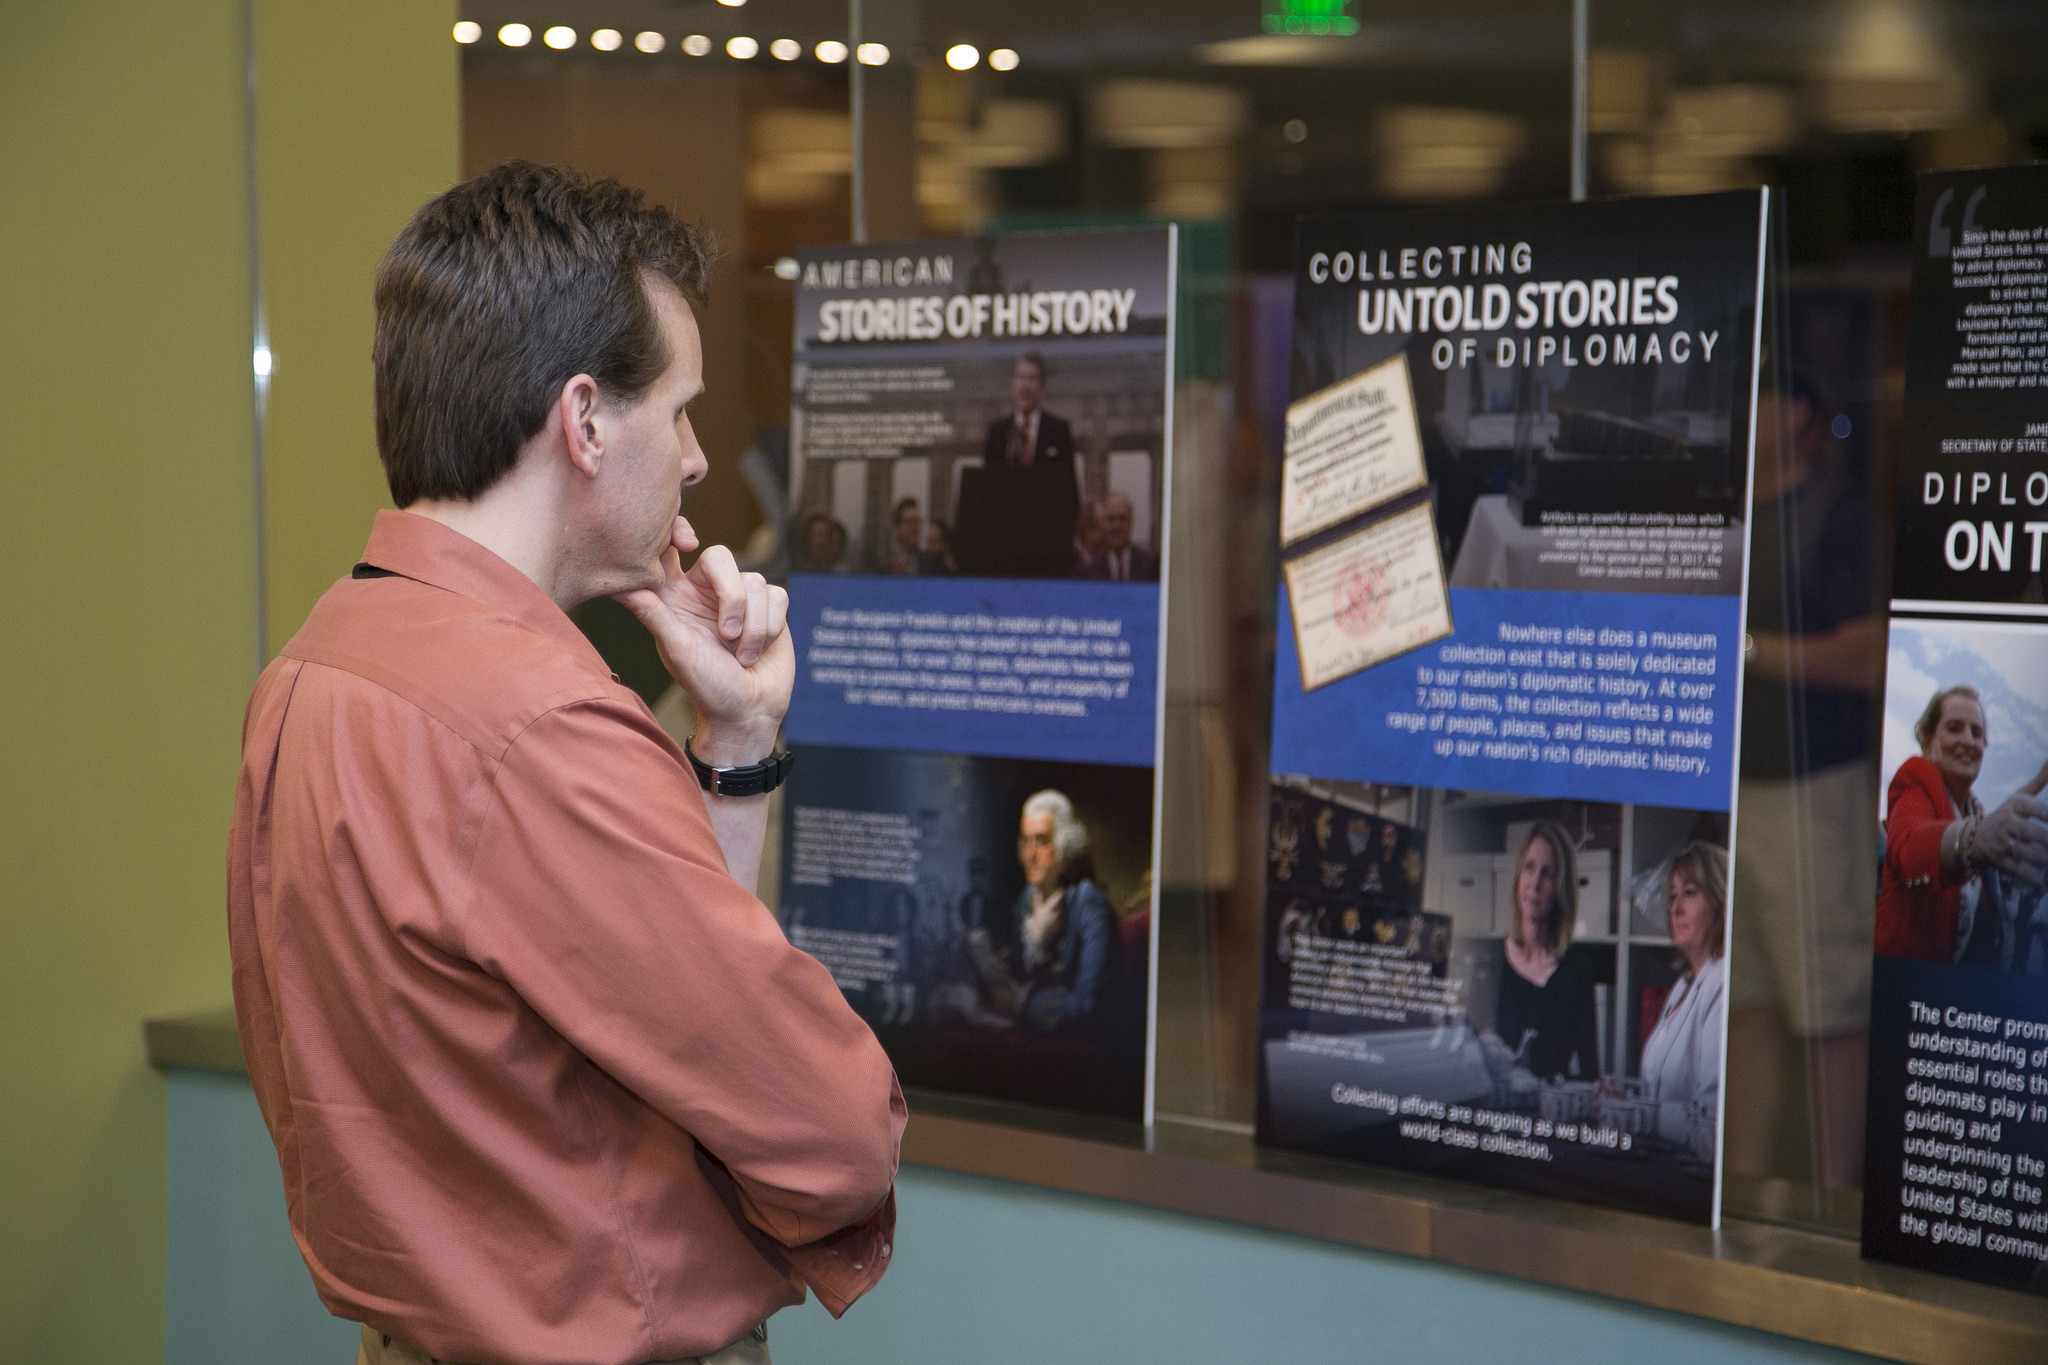 A man observes the posters of the Diplomacy Center